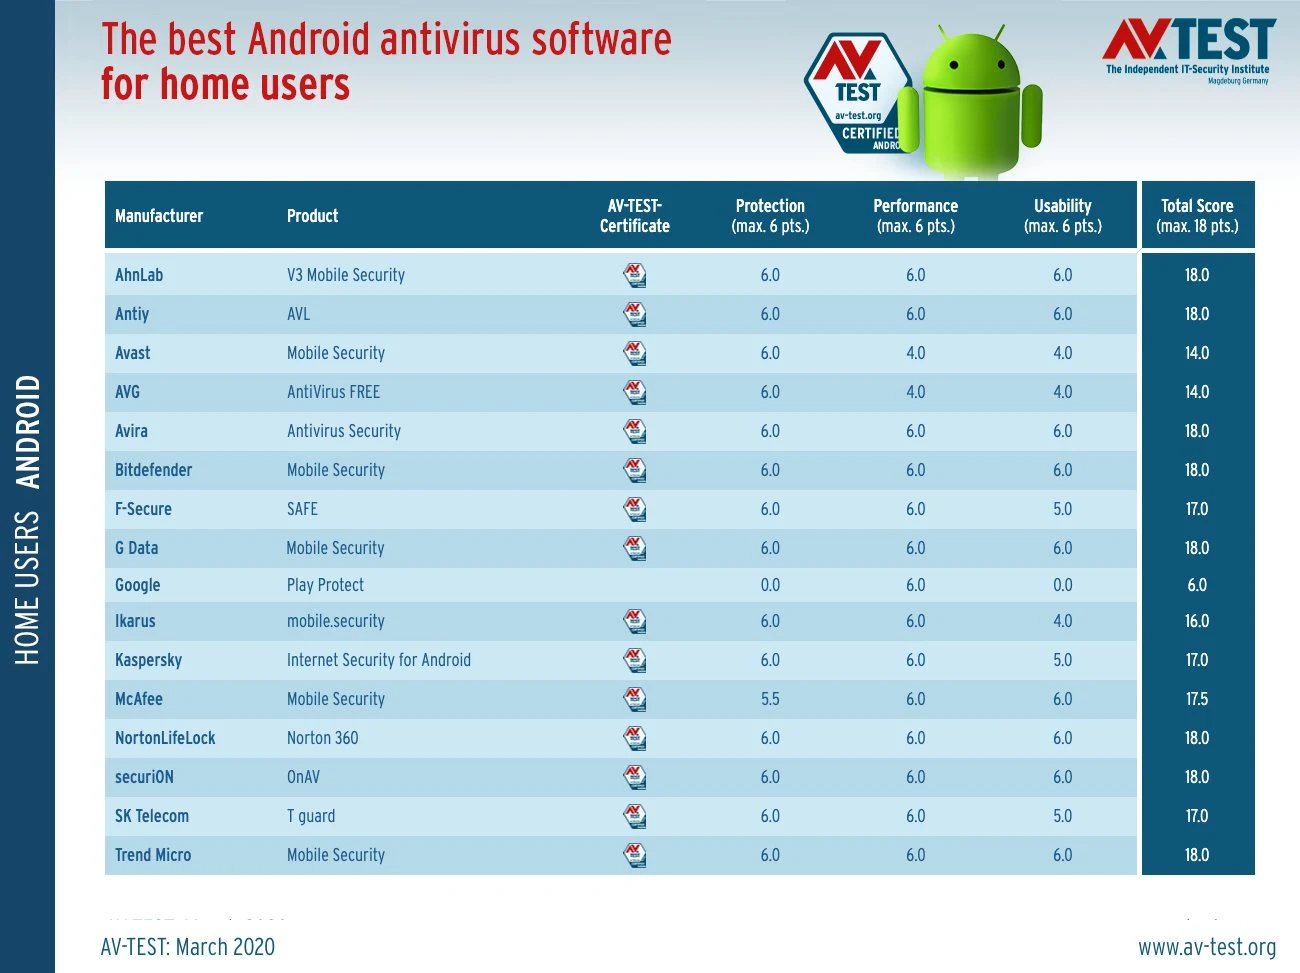 The best Android antivirus apps in 2020